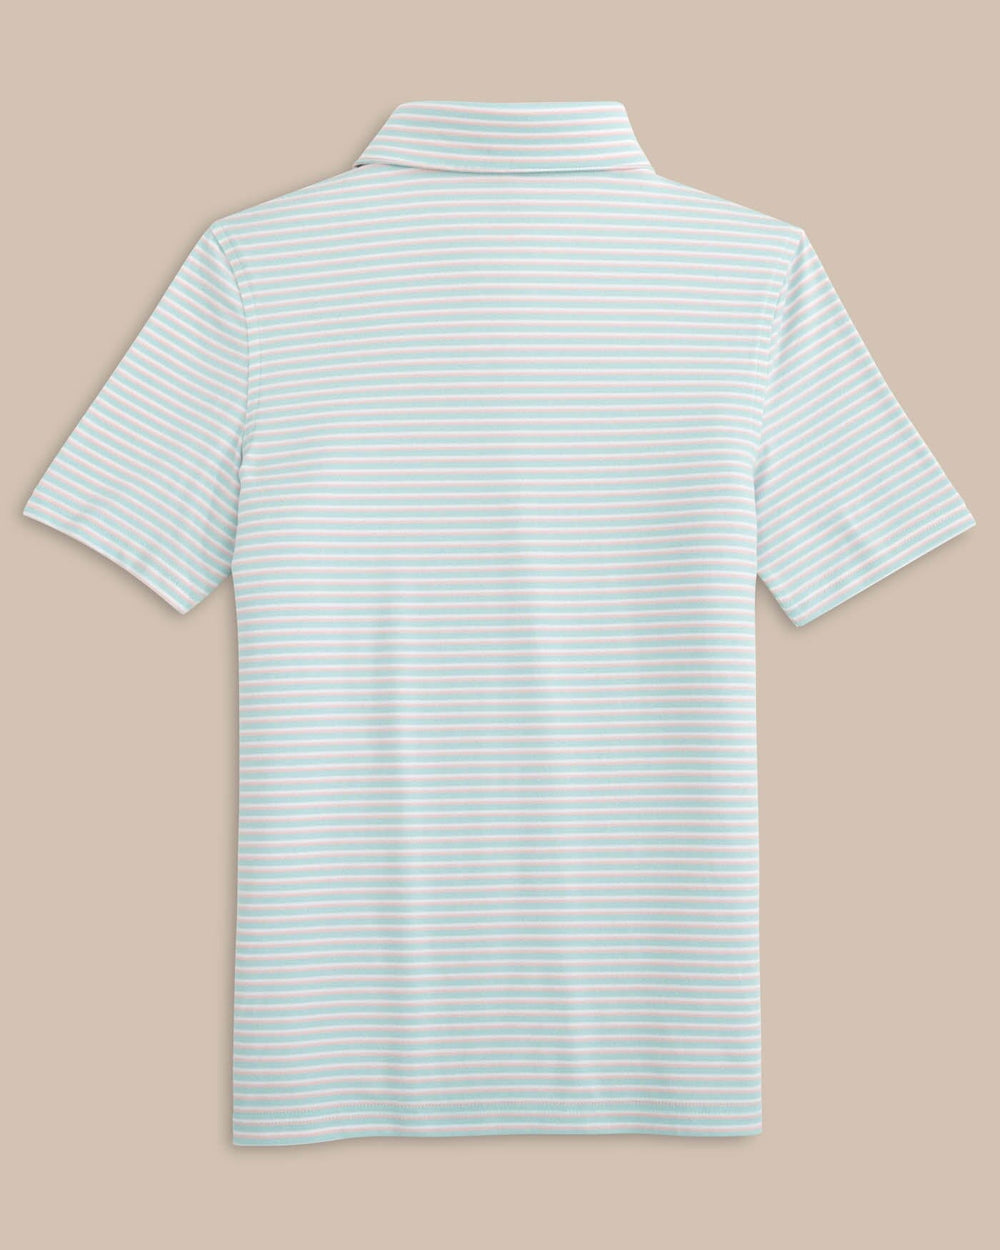 The back view of the Southern Tide Kids Ryder Heather Halls Stripe Performance Polo by Southern Tide - Heather Wake Blue